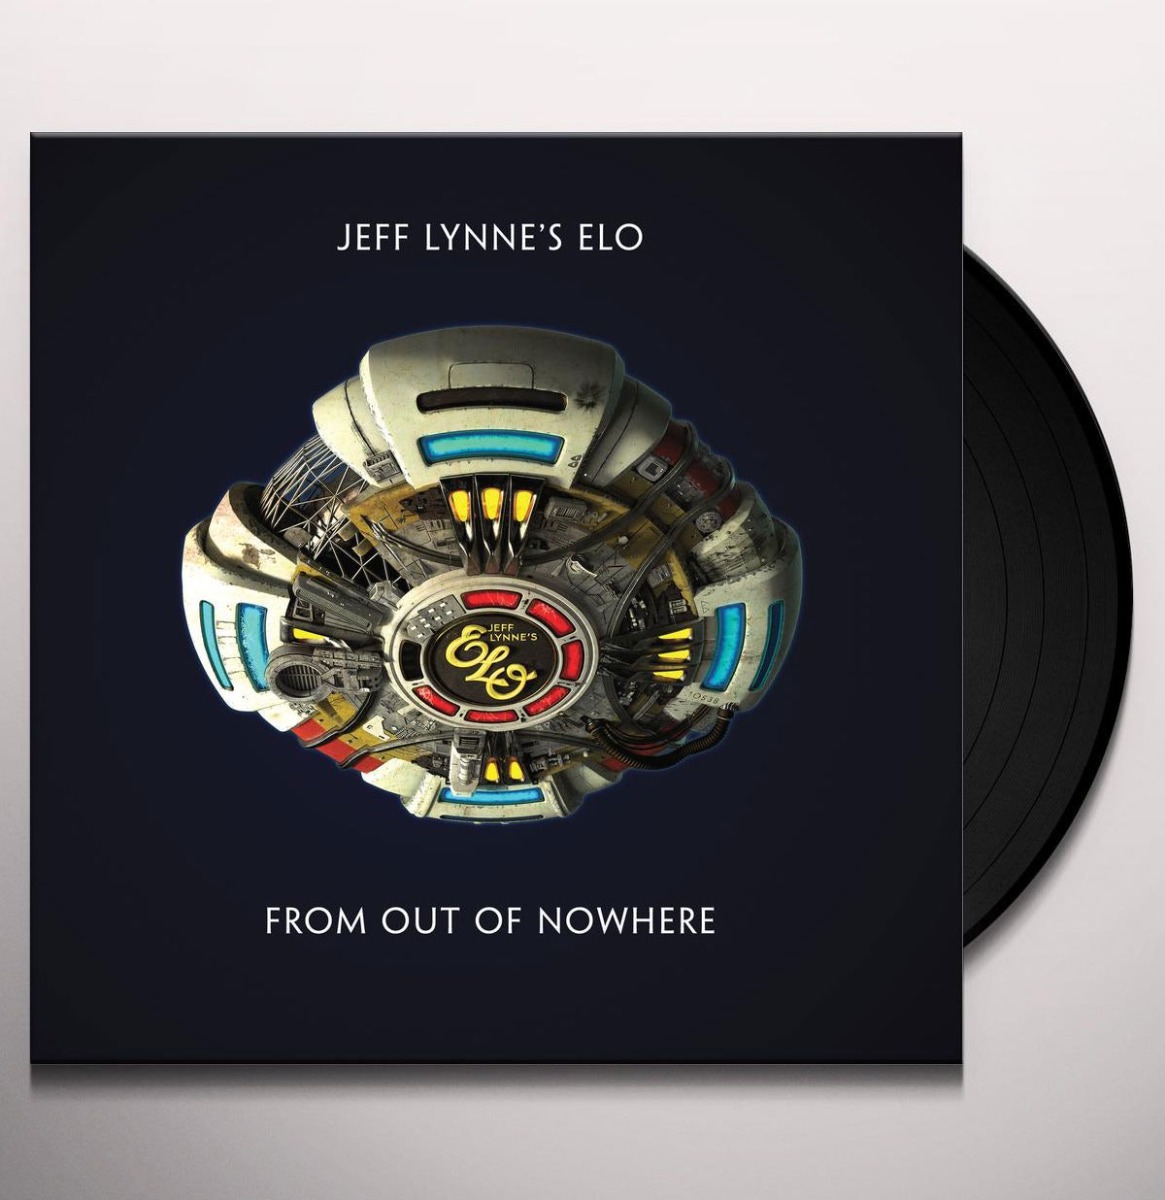 Jeff Lynne's ELO - From Out Of Nowhere LP